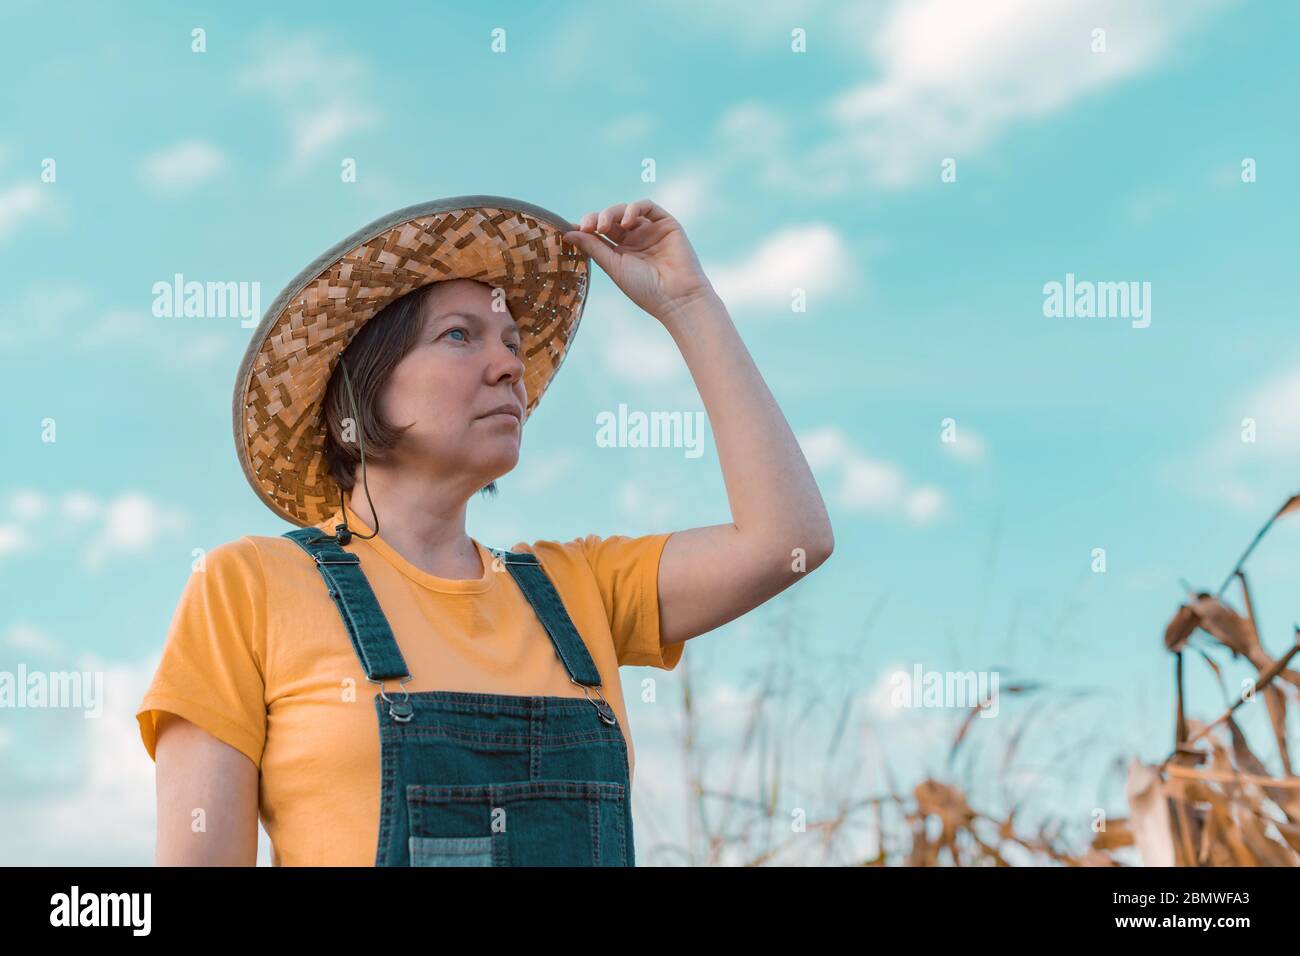 Female corn farmer looking over cornfield, portrait of woman agronomist with straw hat and jeans bib overalls Stock Photo